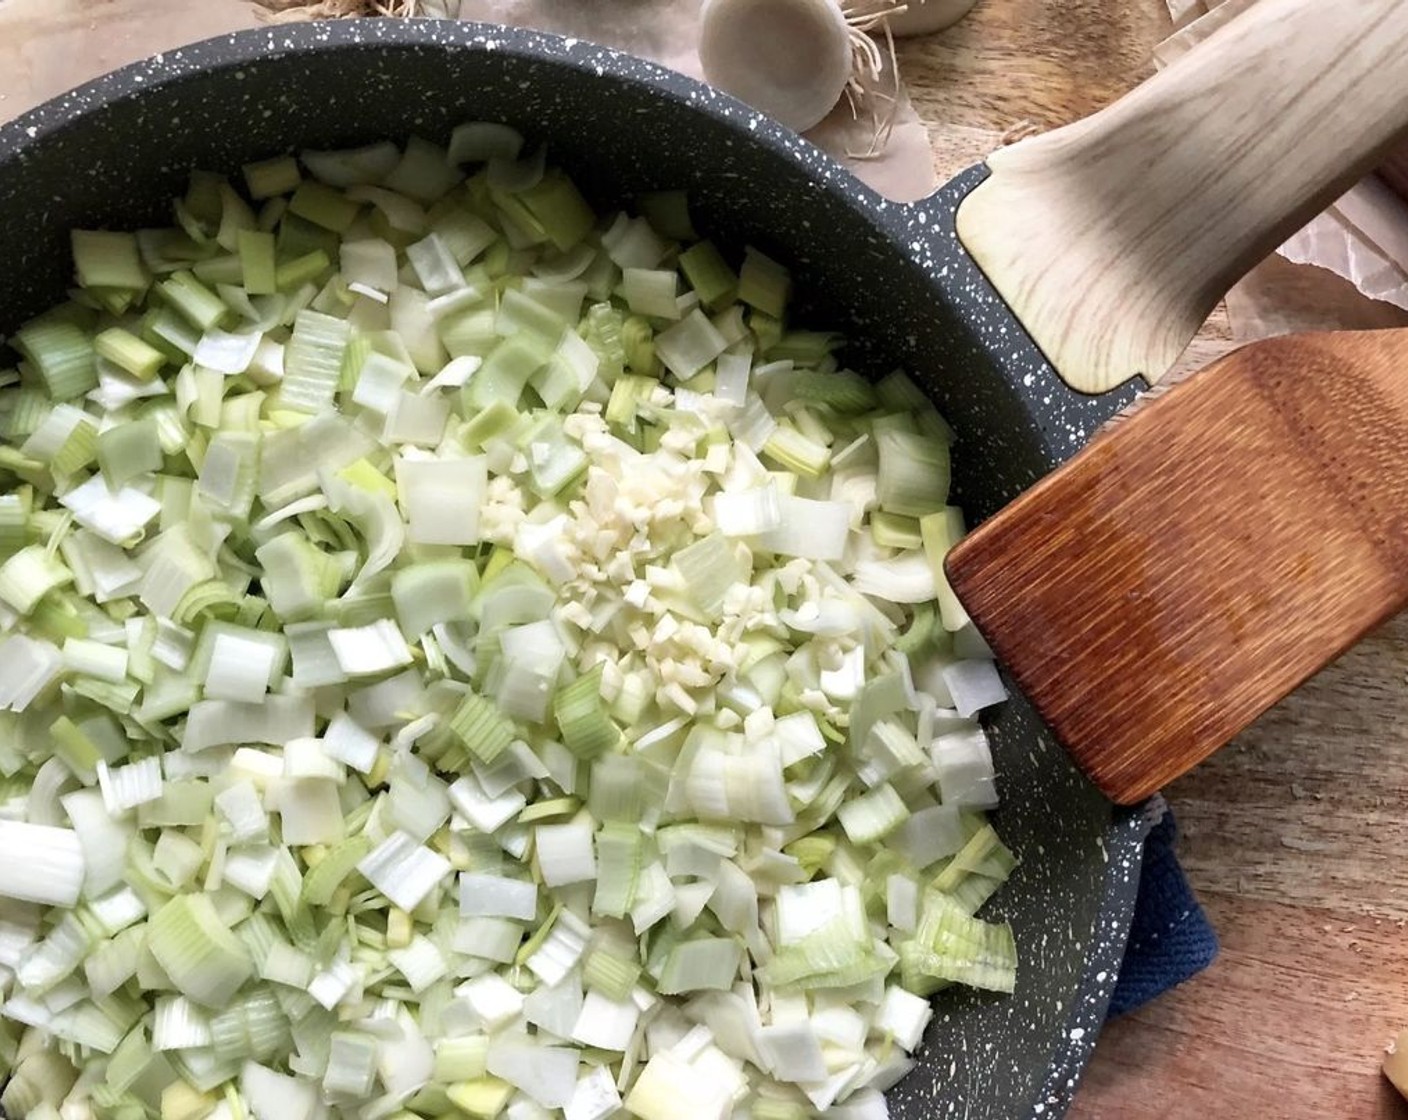 step 5 For the filling, heat the Unsalted Butter (2 Tbsp) and Olive Oil (2 Tbsp) over medium-high heat in a medium-large saucepan. Add the Leeks (4 cups) and Garlic (2 cloves). Cook and stir 3-4 minutes or until tender.